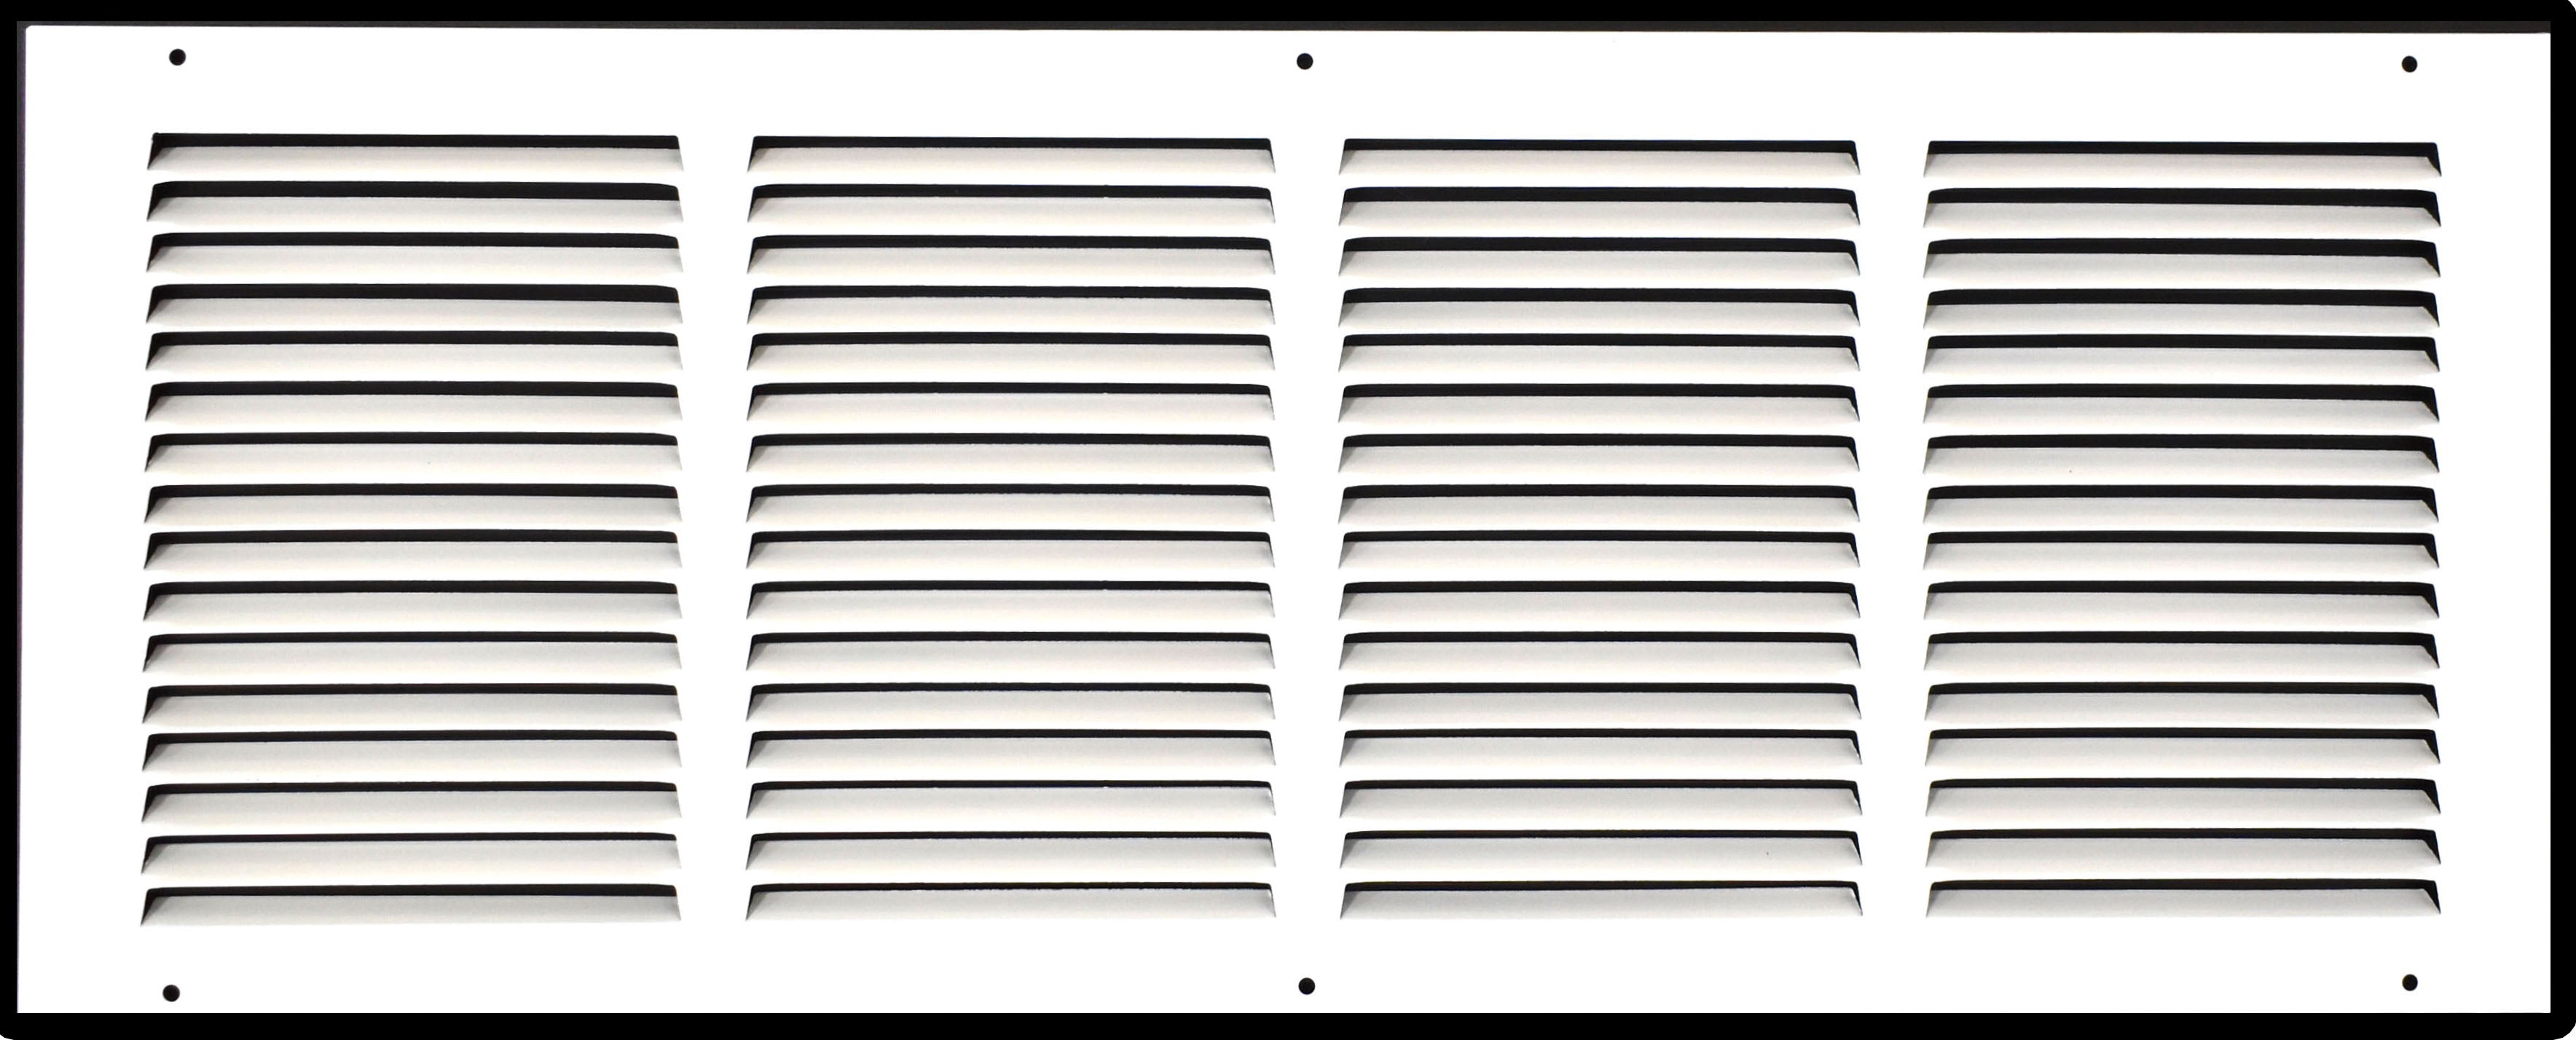 airgrilles 24" x 8" duct opening   hd steel return air grille for sidewall and ceiling  agc  7agc-flt-wh-24x8 756014649673 - 1